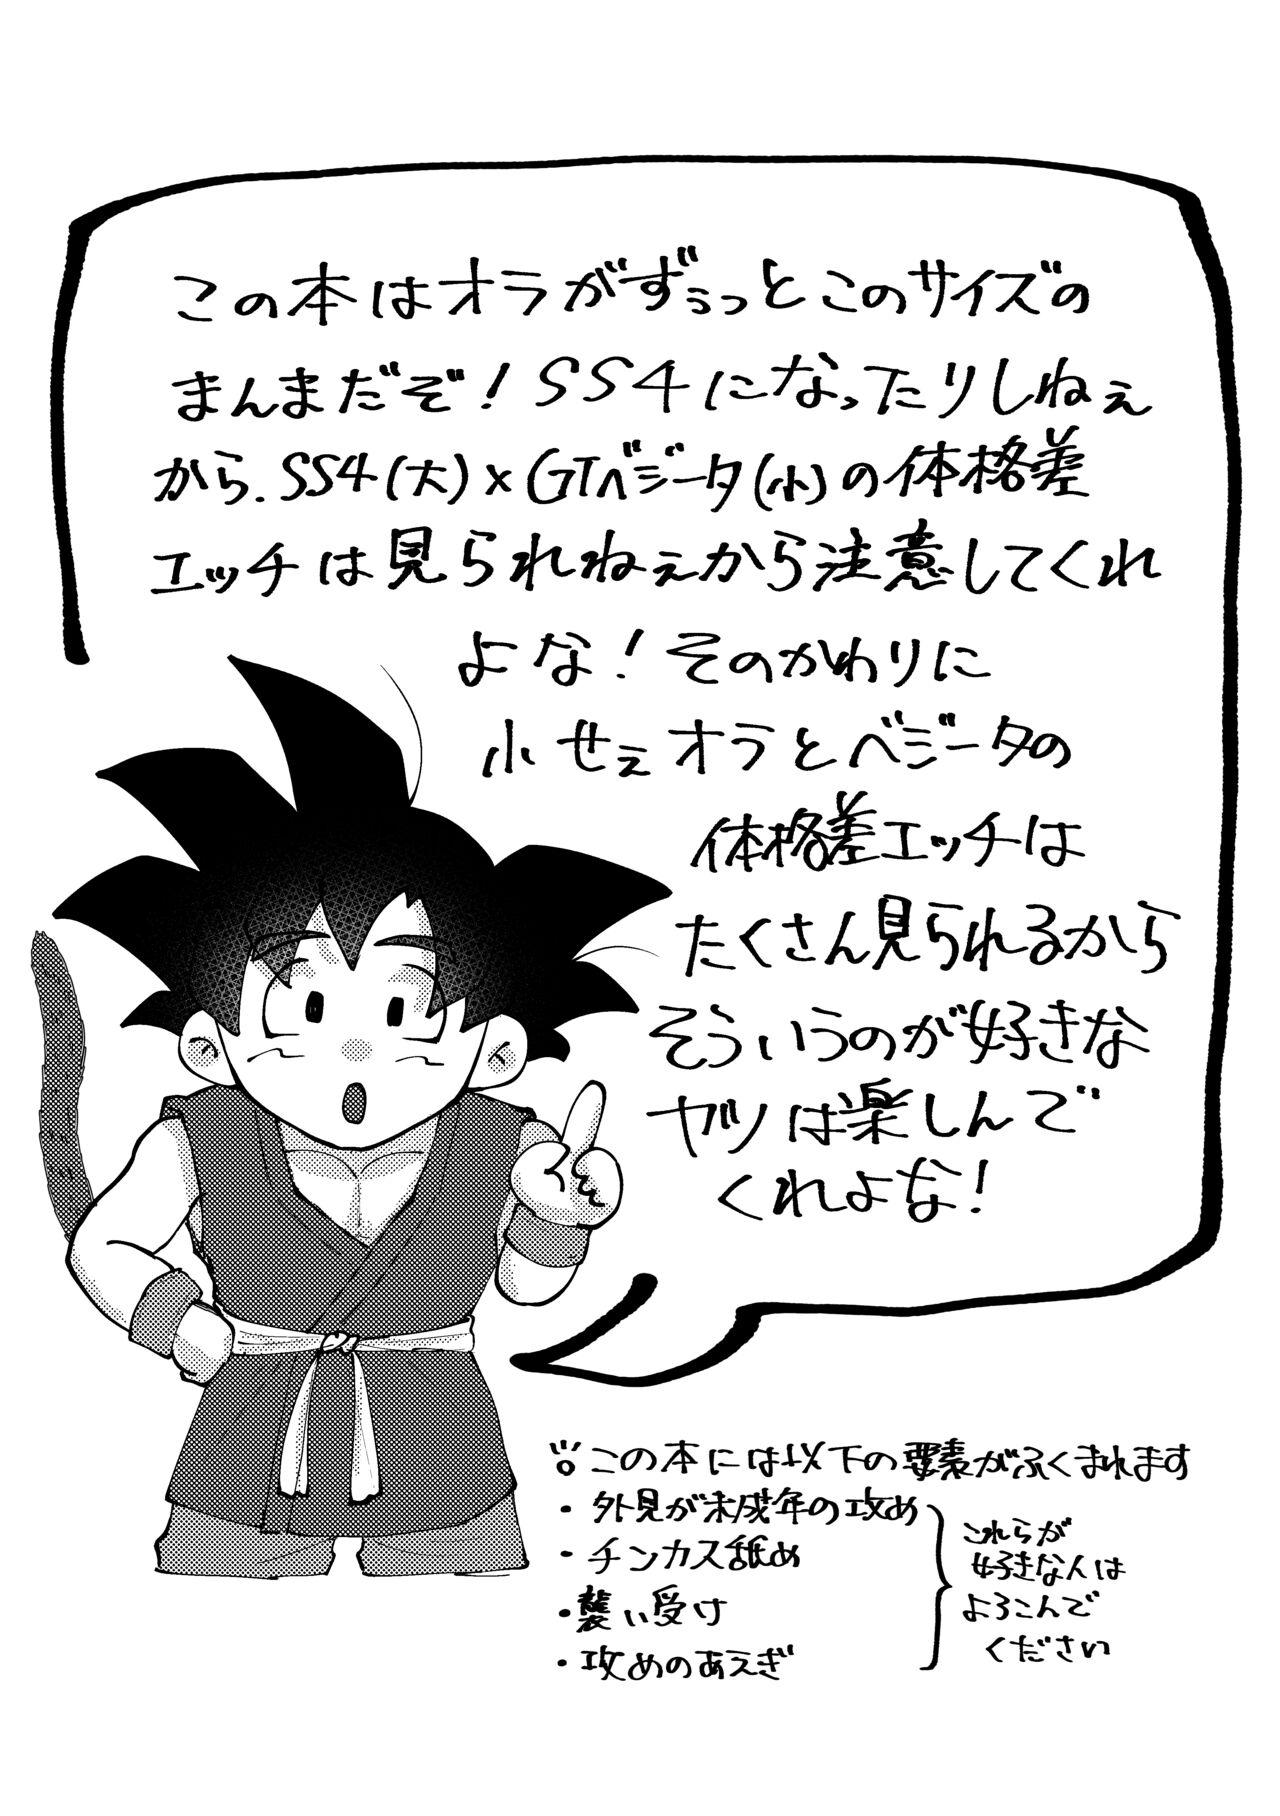 Relax GT no Dosukebe na KakaVege - Dragon ball gt Gay Shorthair - Page 2